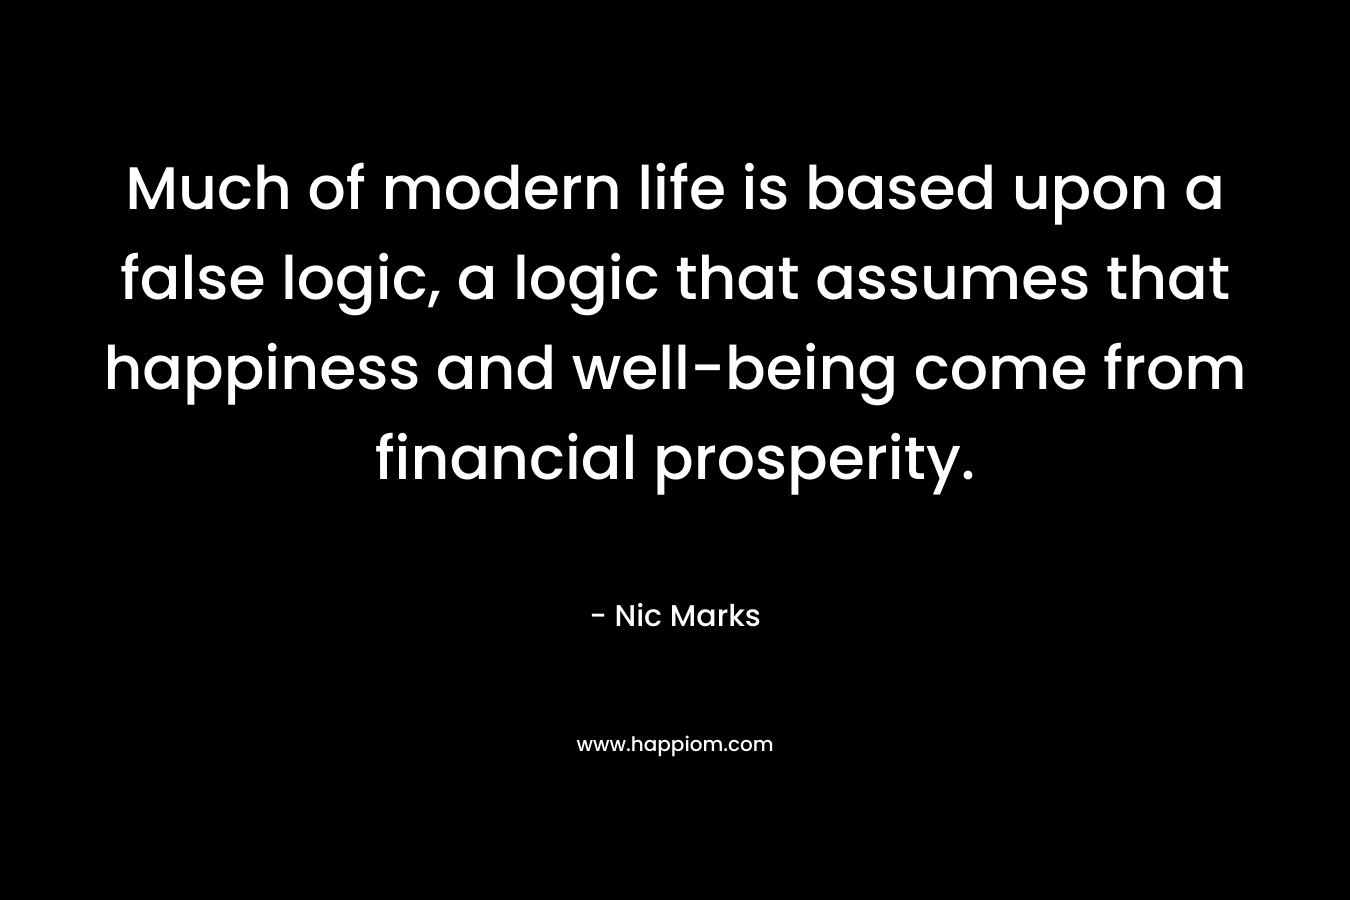 Much of modern life is based upon a false logic, a logic that assumes that happiness and well-being come from financial prosperity.